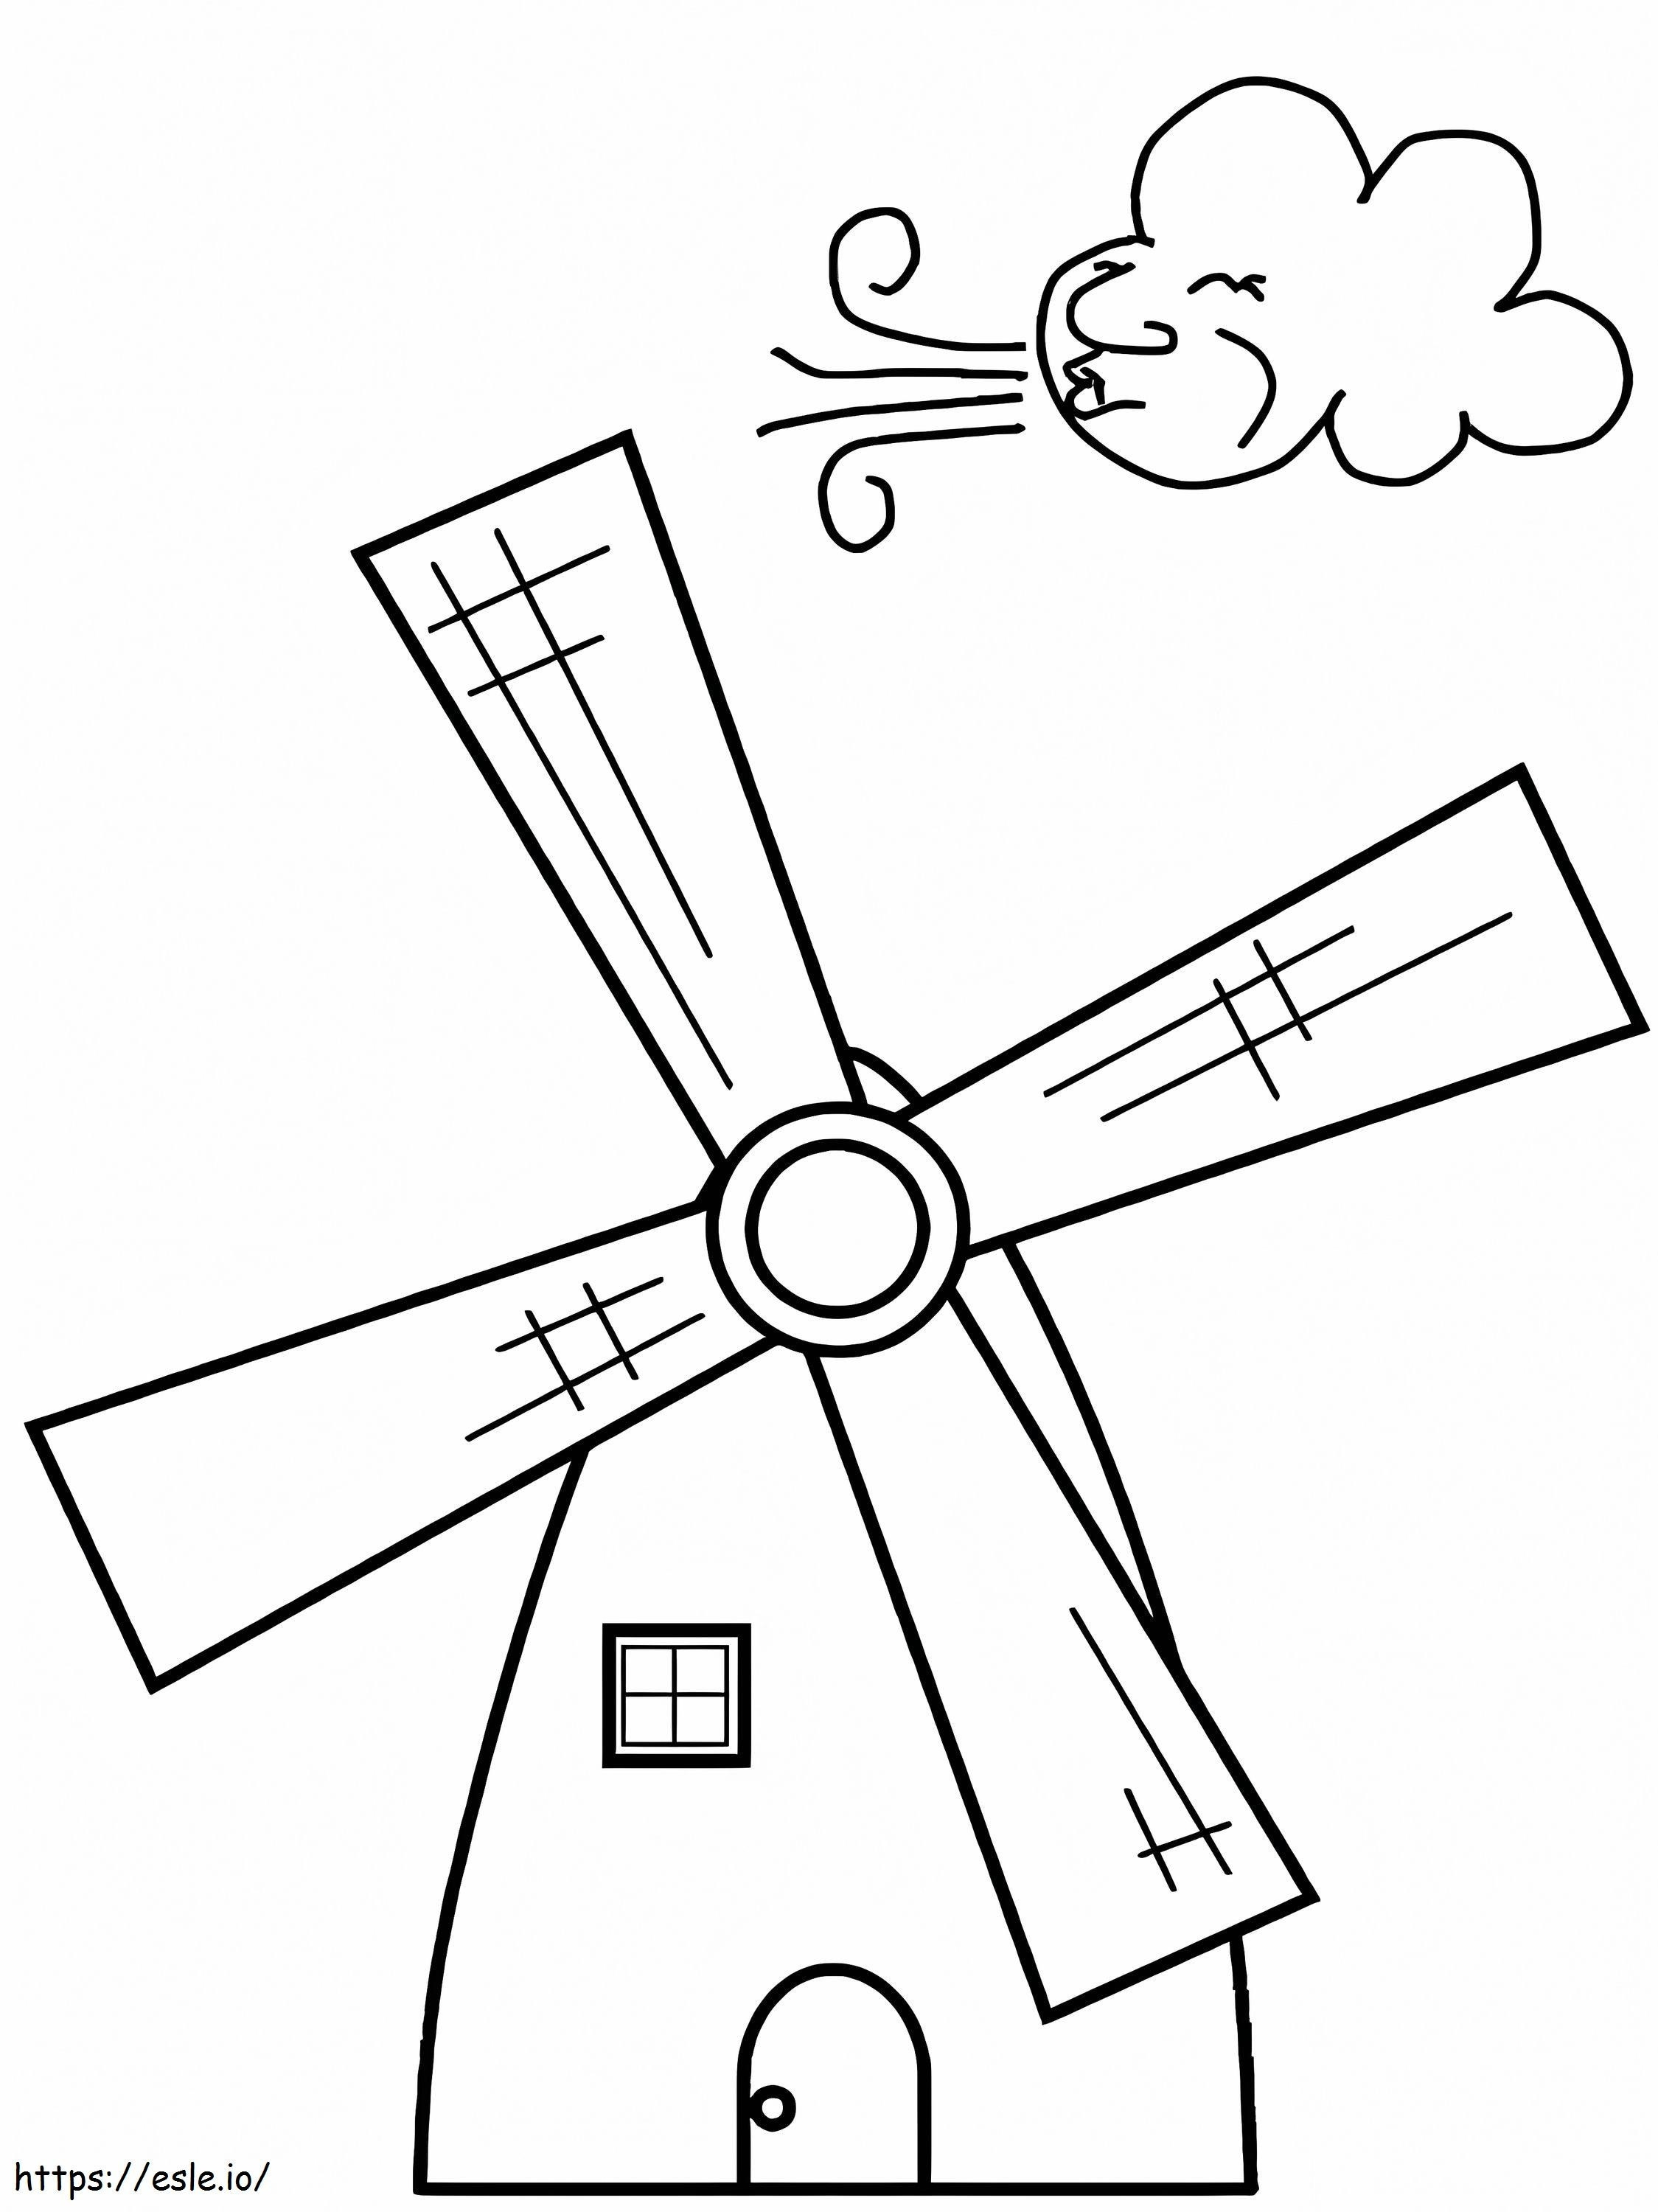 Windmill In Germany coloring page